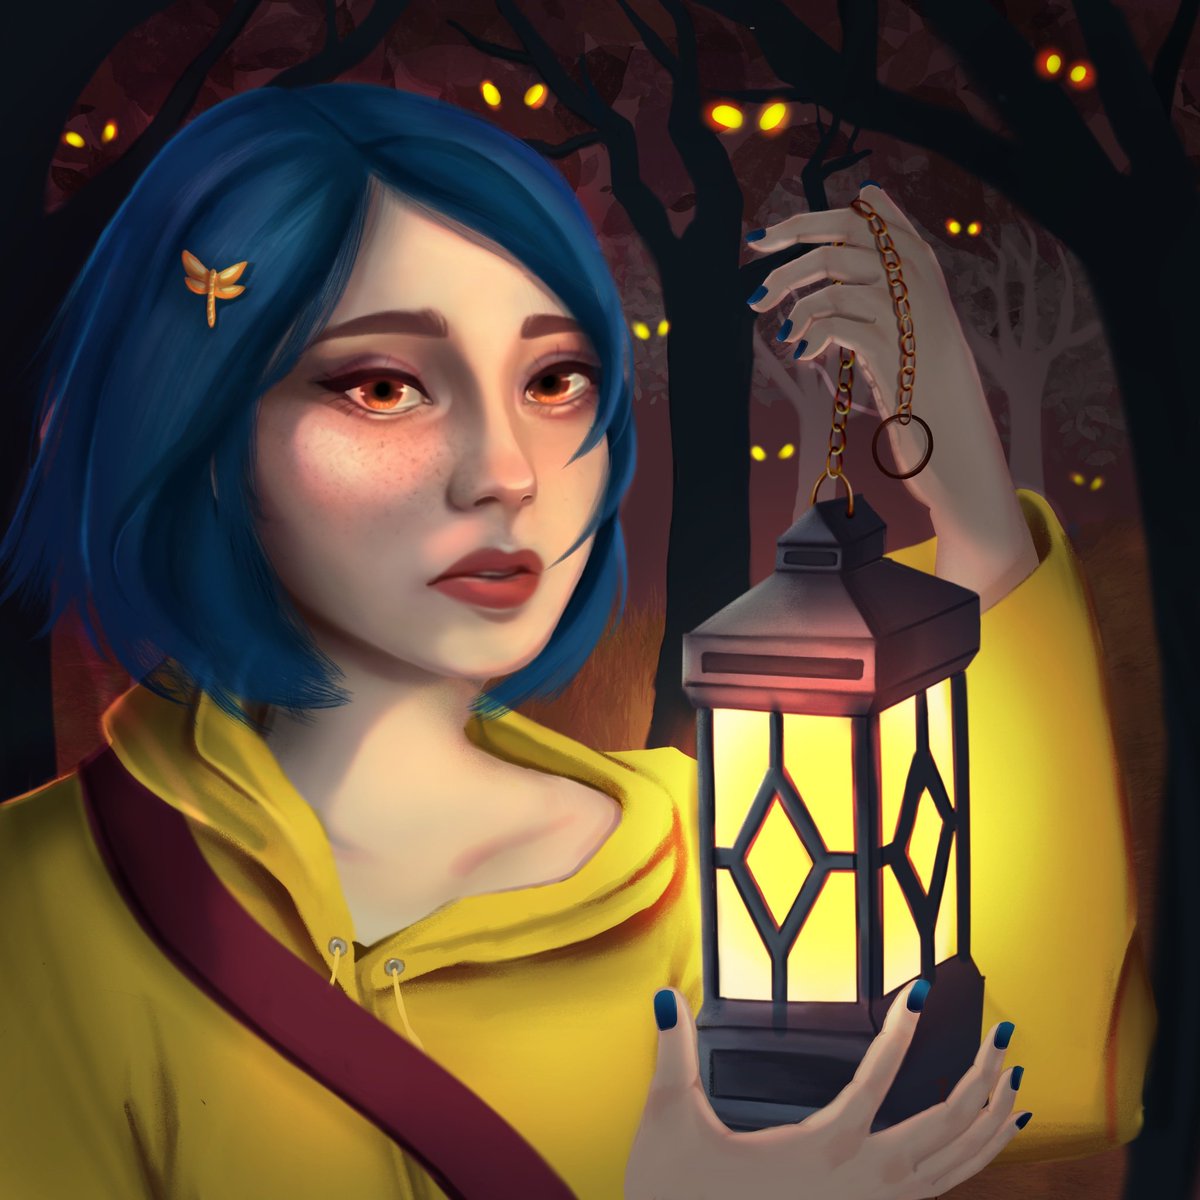 Hello! I'm Flo! Freelance Digital artist from the Ph I do mostly semi-realistic artHere are some of my works~Commission me:  http://sfloreven.carrd.co Ig:  http://www.instragram.com/sfloreven Fb:  http://www.fb.com/sfloreven 